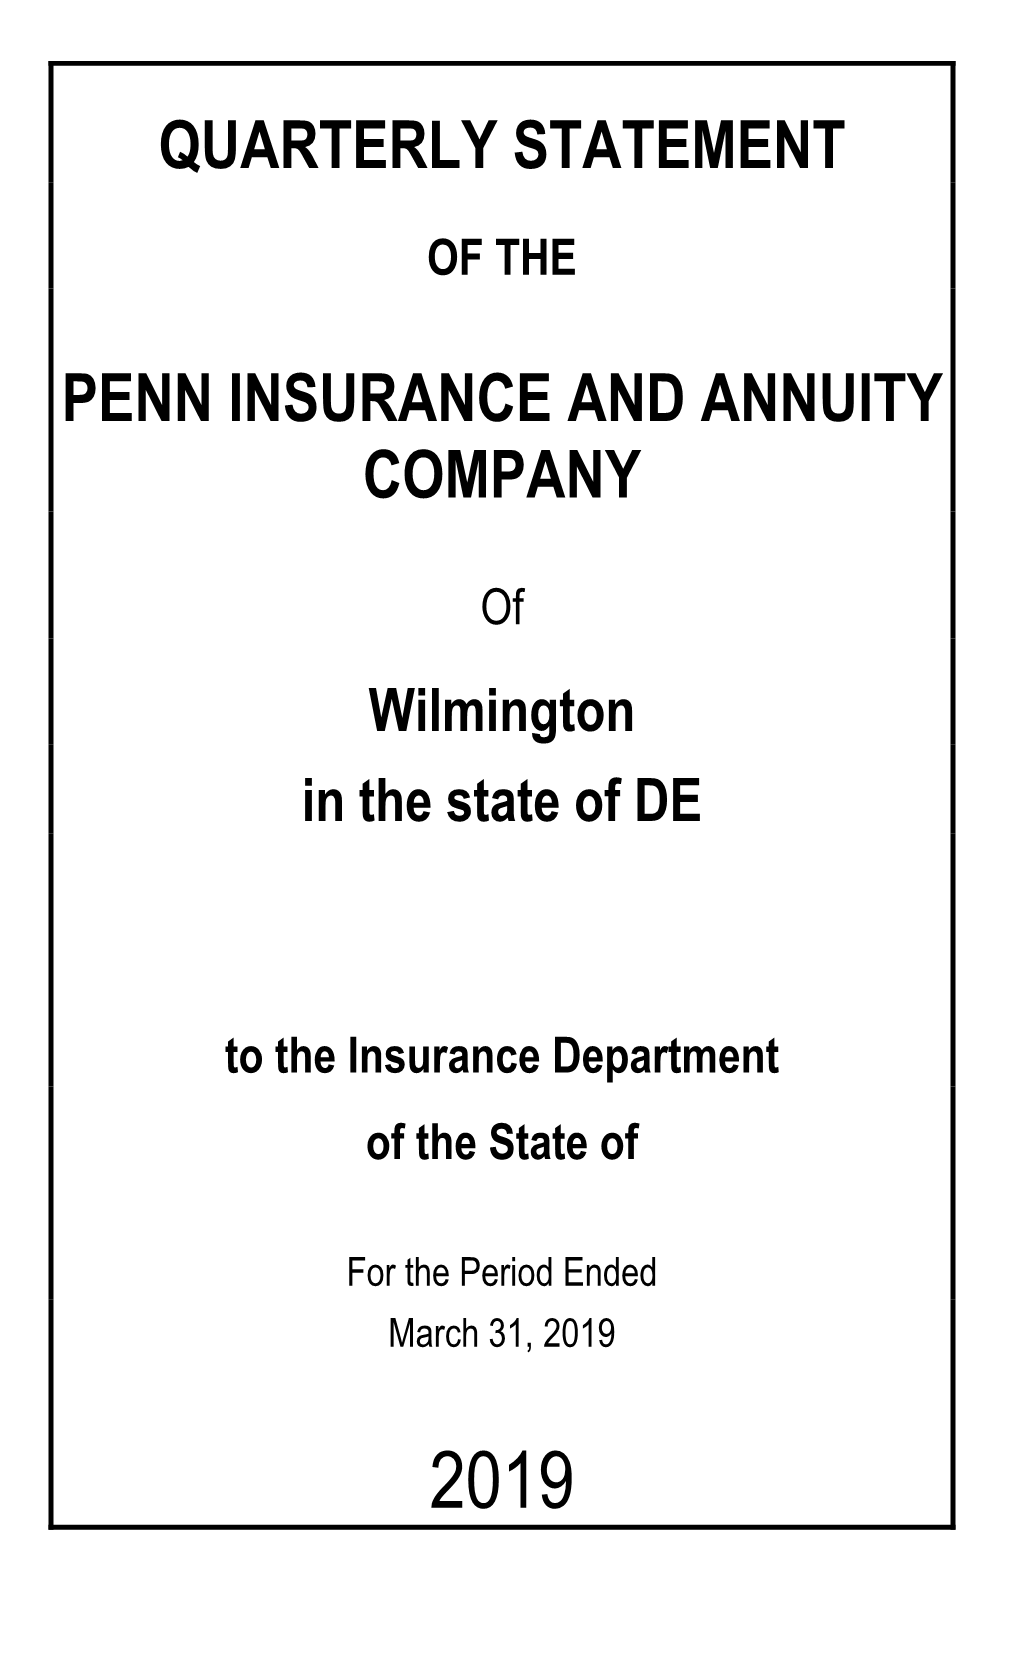 Quarterly Statement Penn Insurance and Annuity